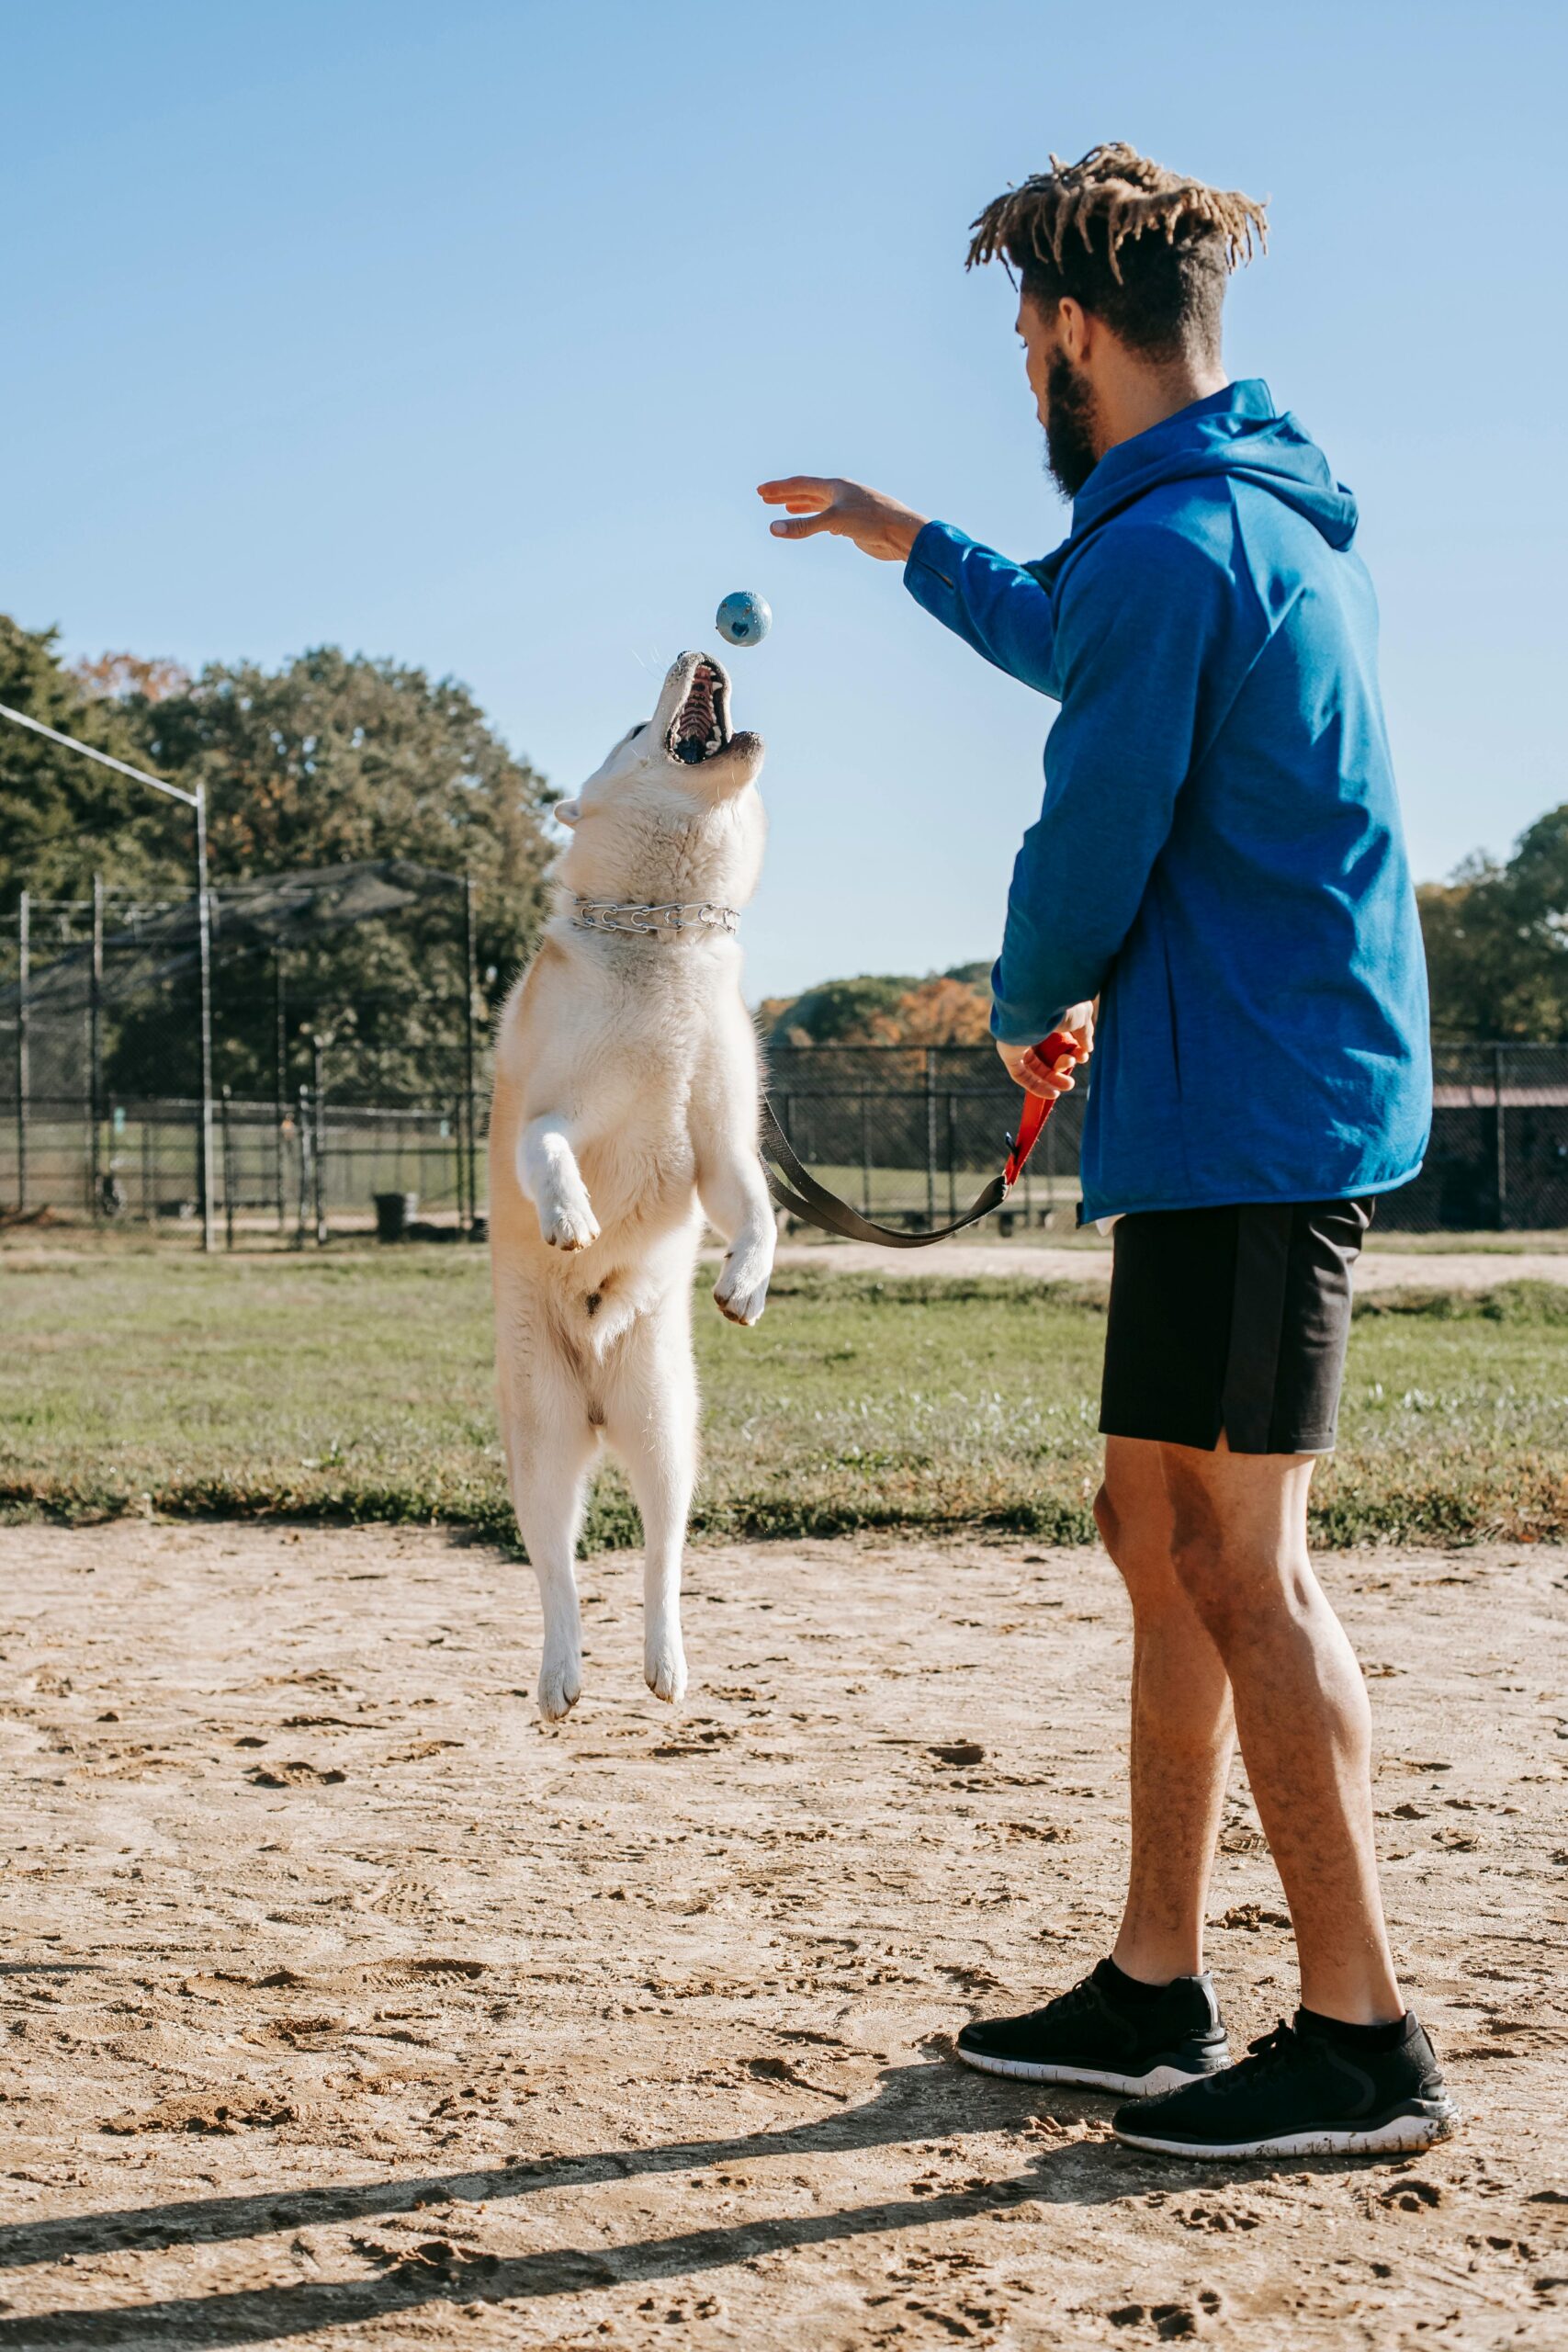 Mastering Canine Communication A Closer Look at Dog Training Methods